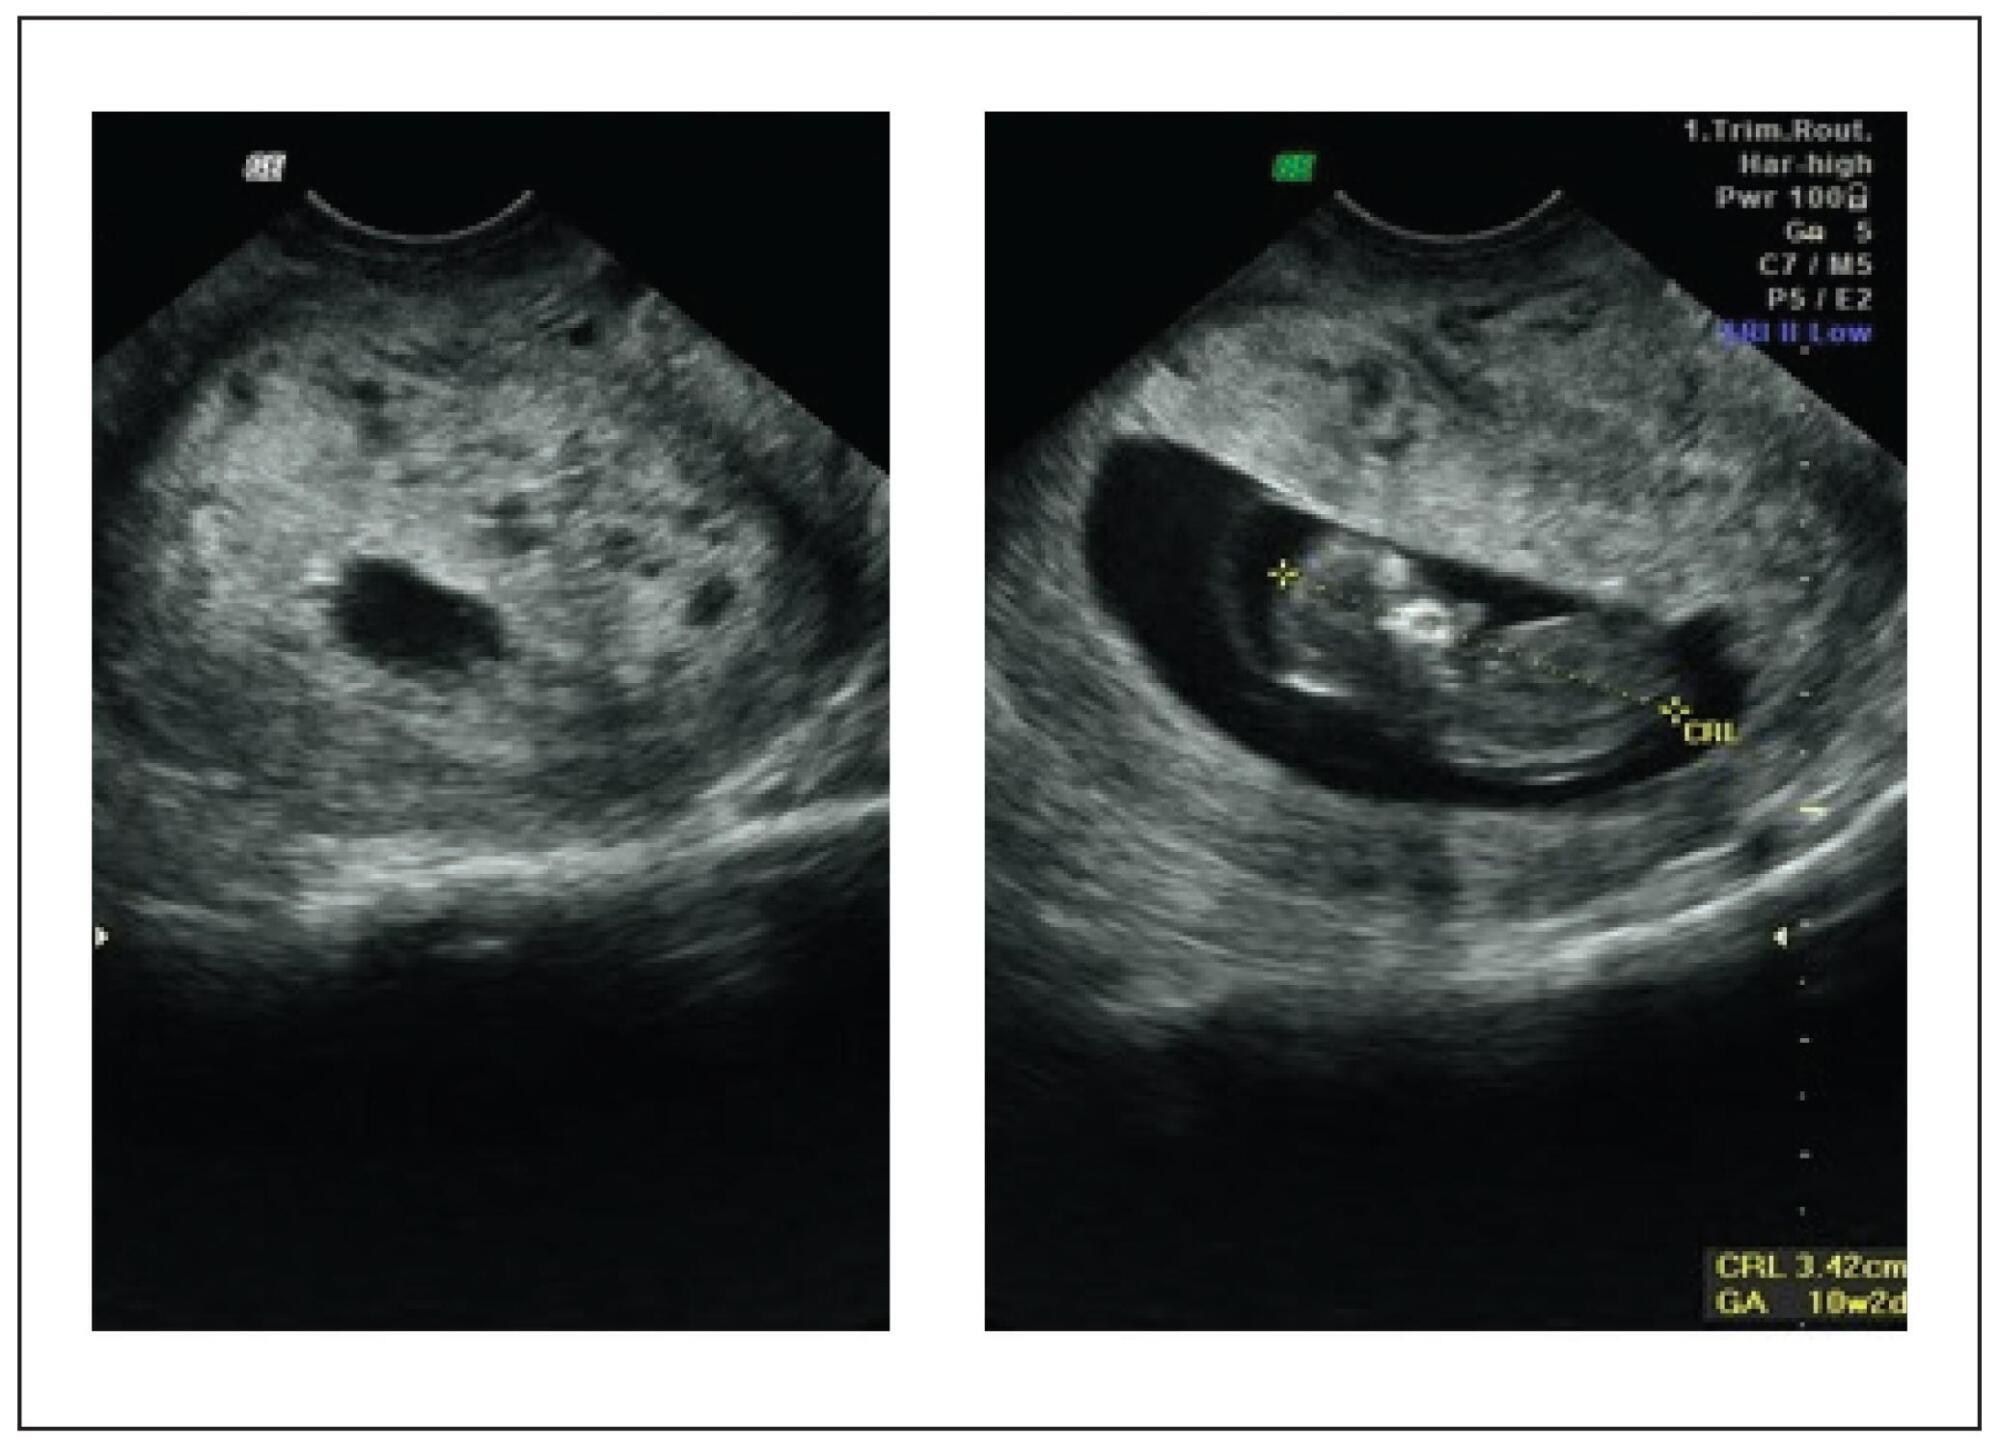 Gestational trophoblastic neoplasia after spontaneous normalization of human chorionic gonadotropin in patient with partial hydatidiform mole